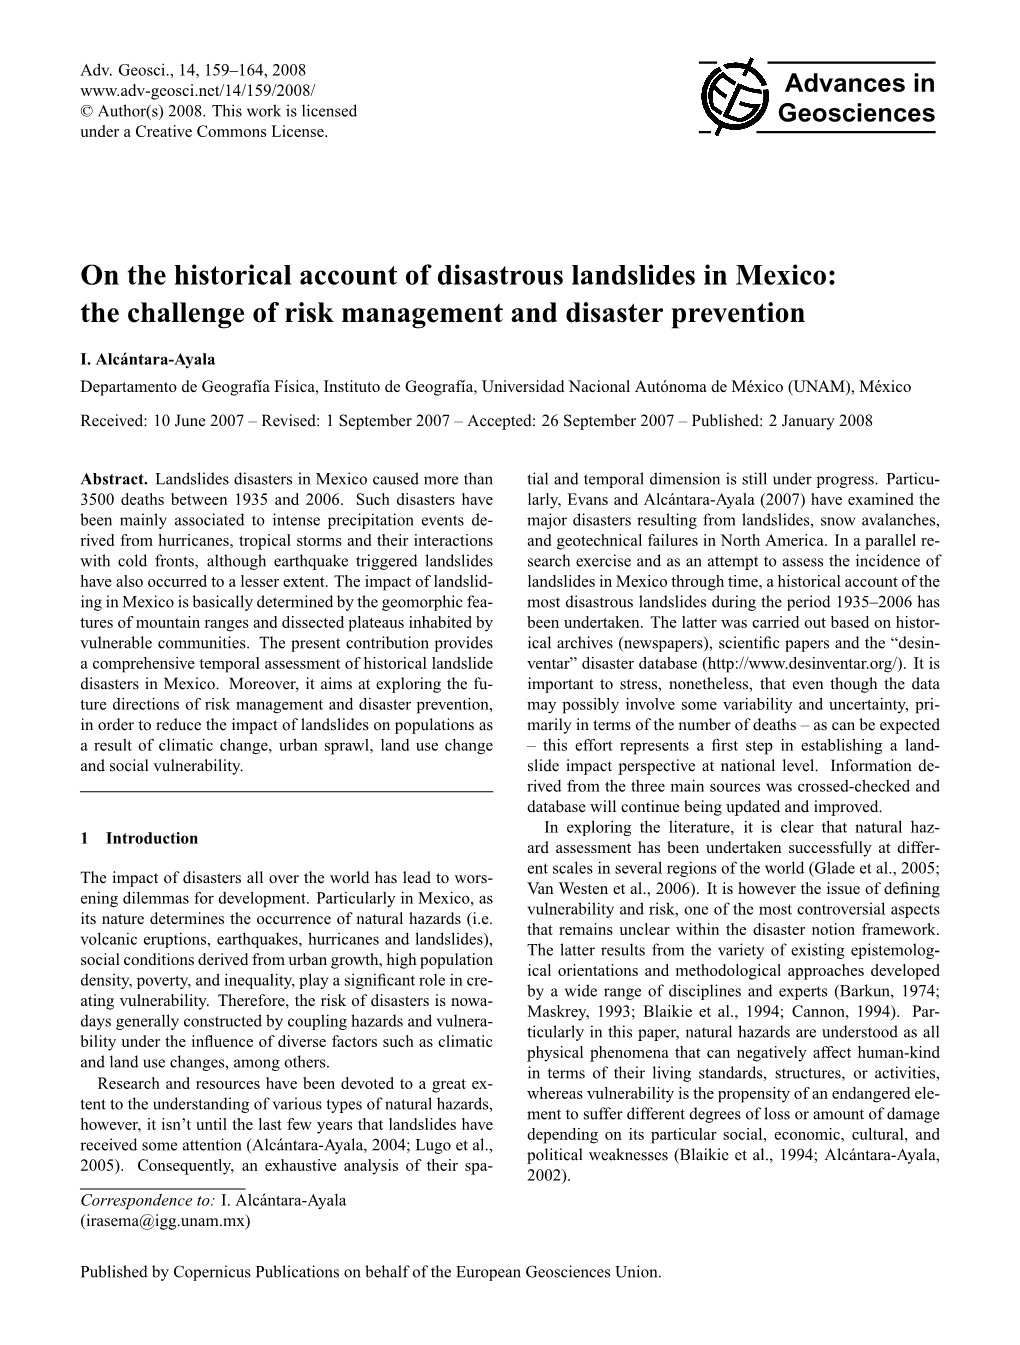 On the Historical Account of Disastrous Landslides in Mexico: the Challenge of Risk Management and Disaster Prevention